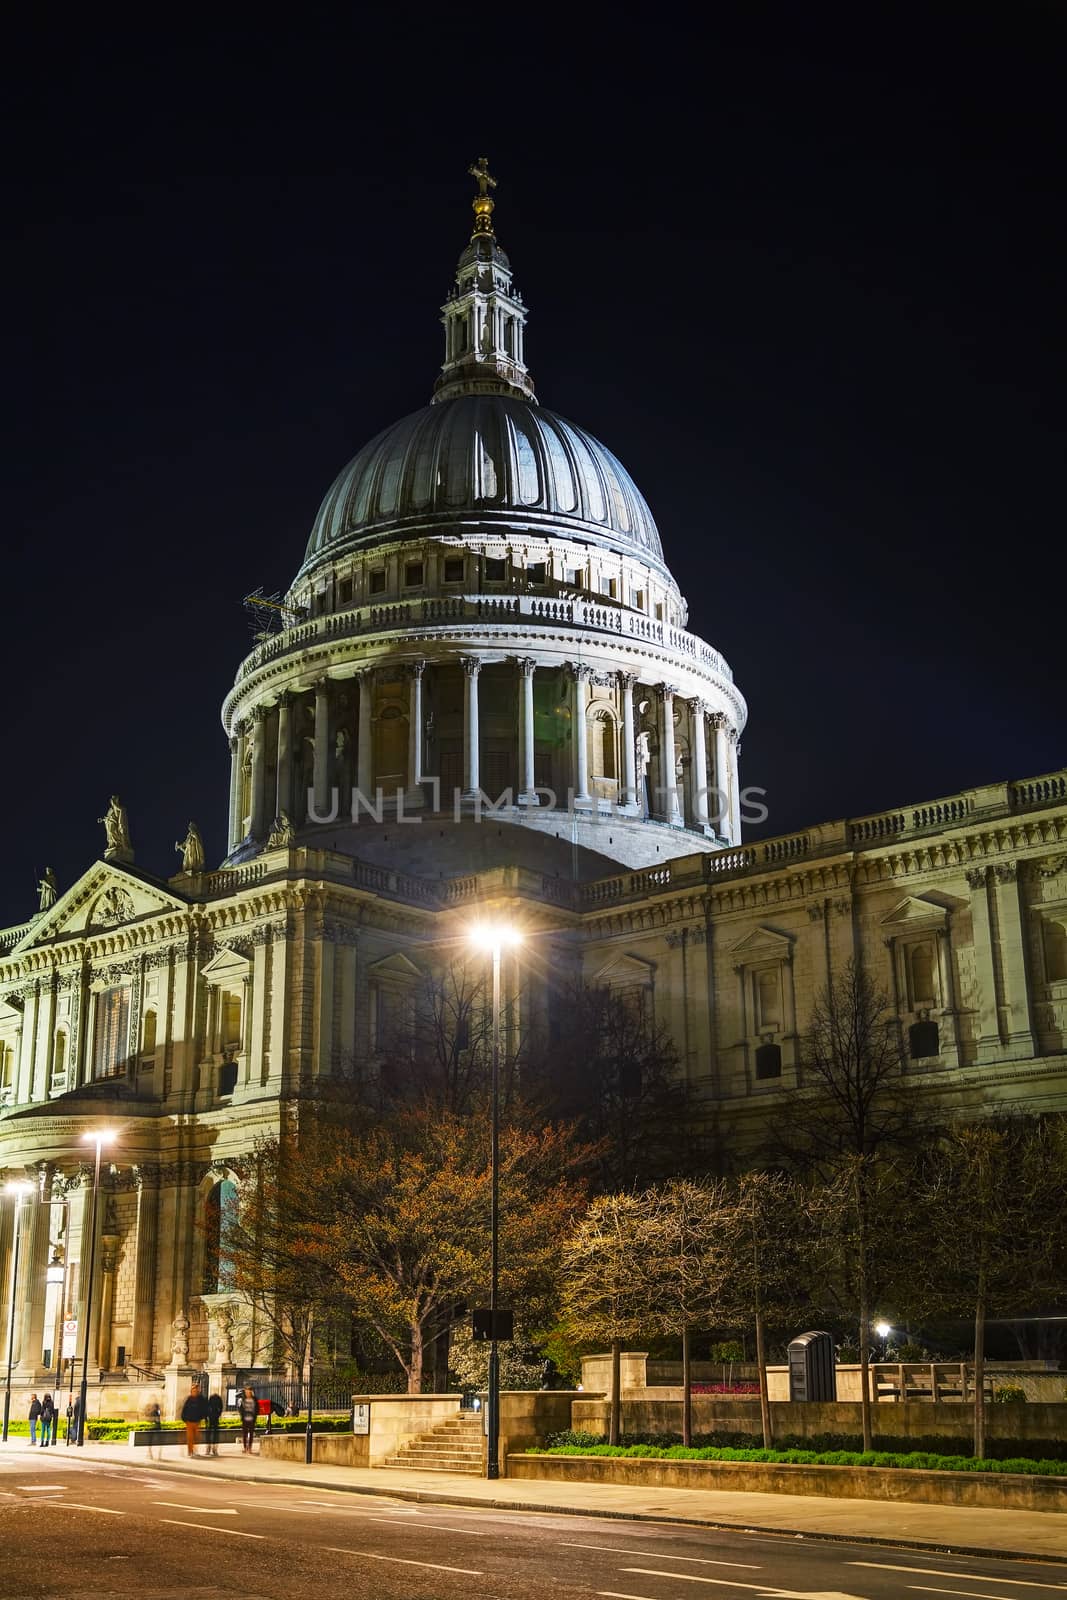 Saint Pauls cathedral in London by AndreyKr